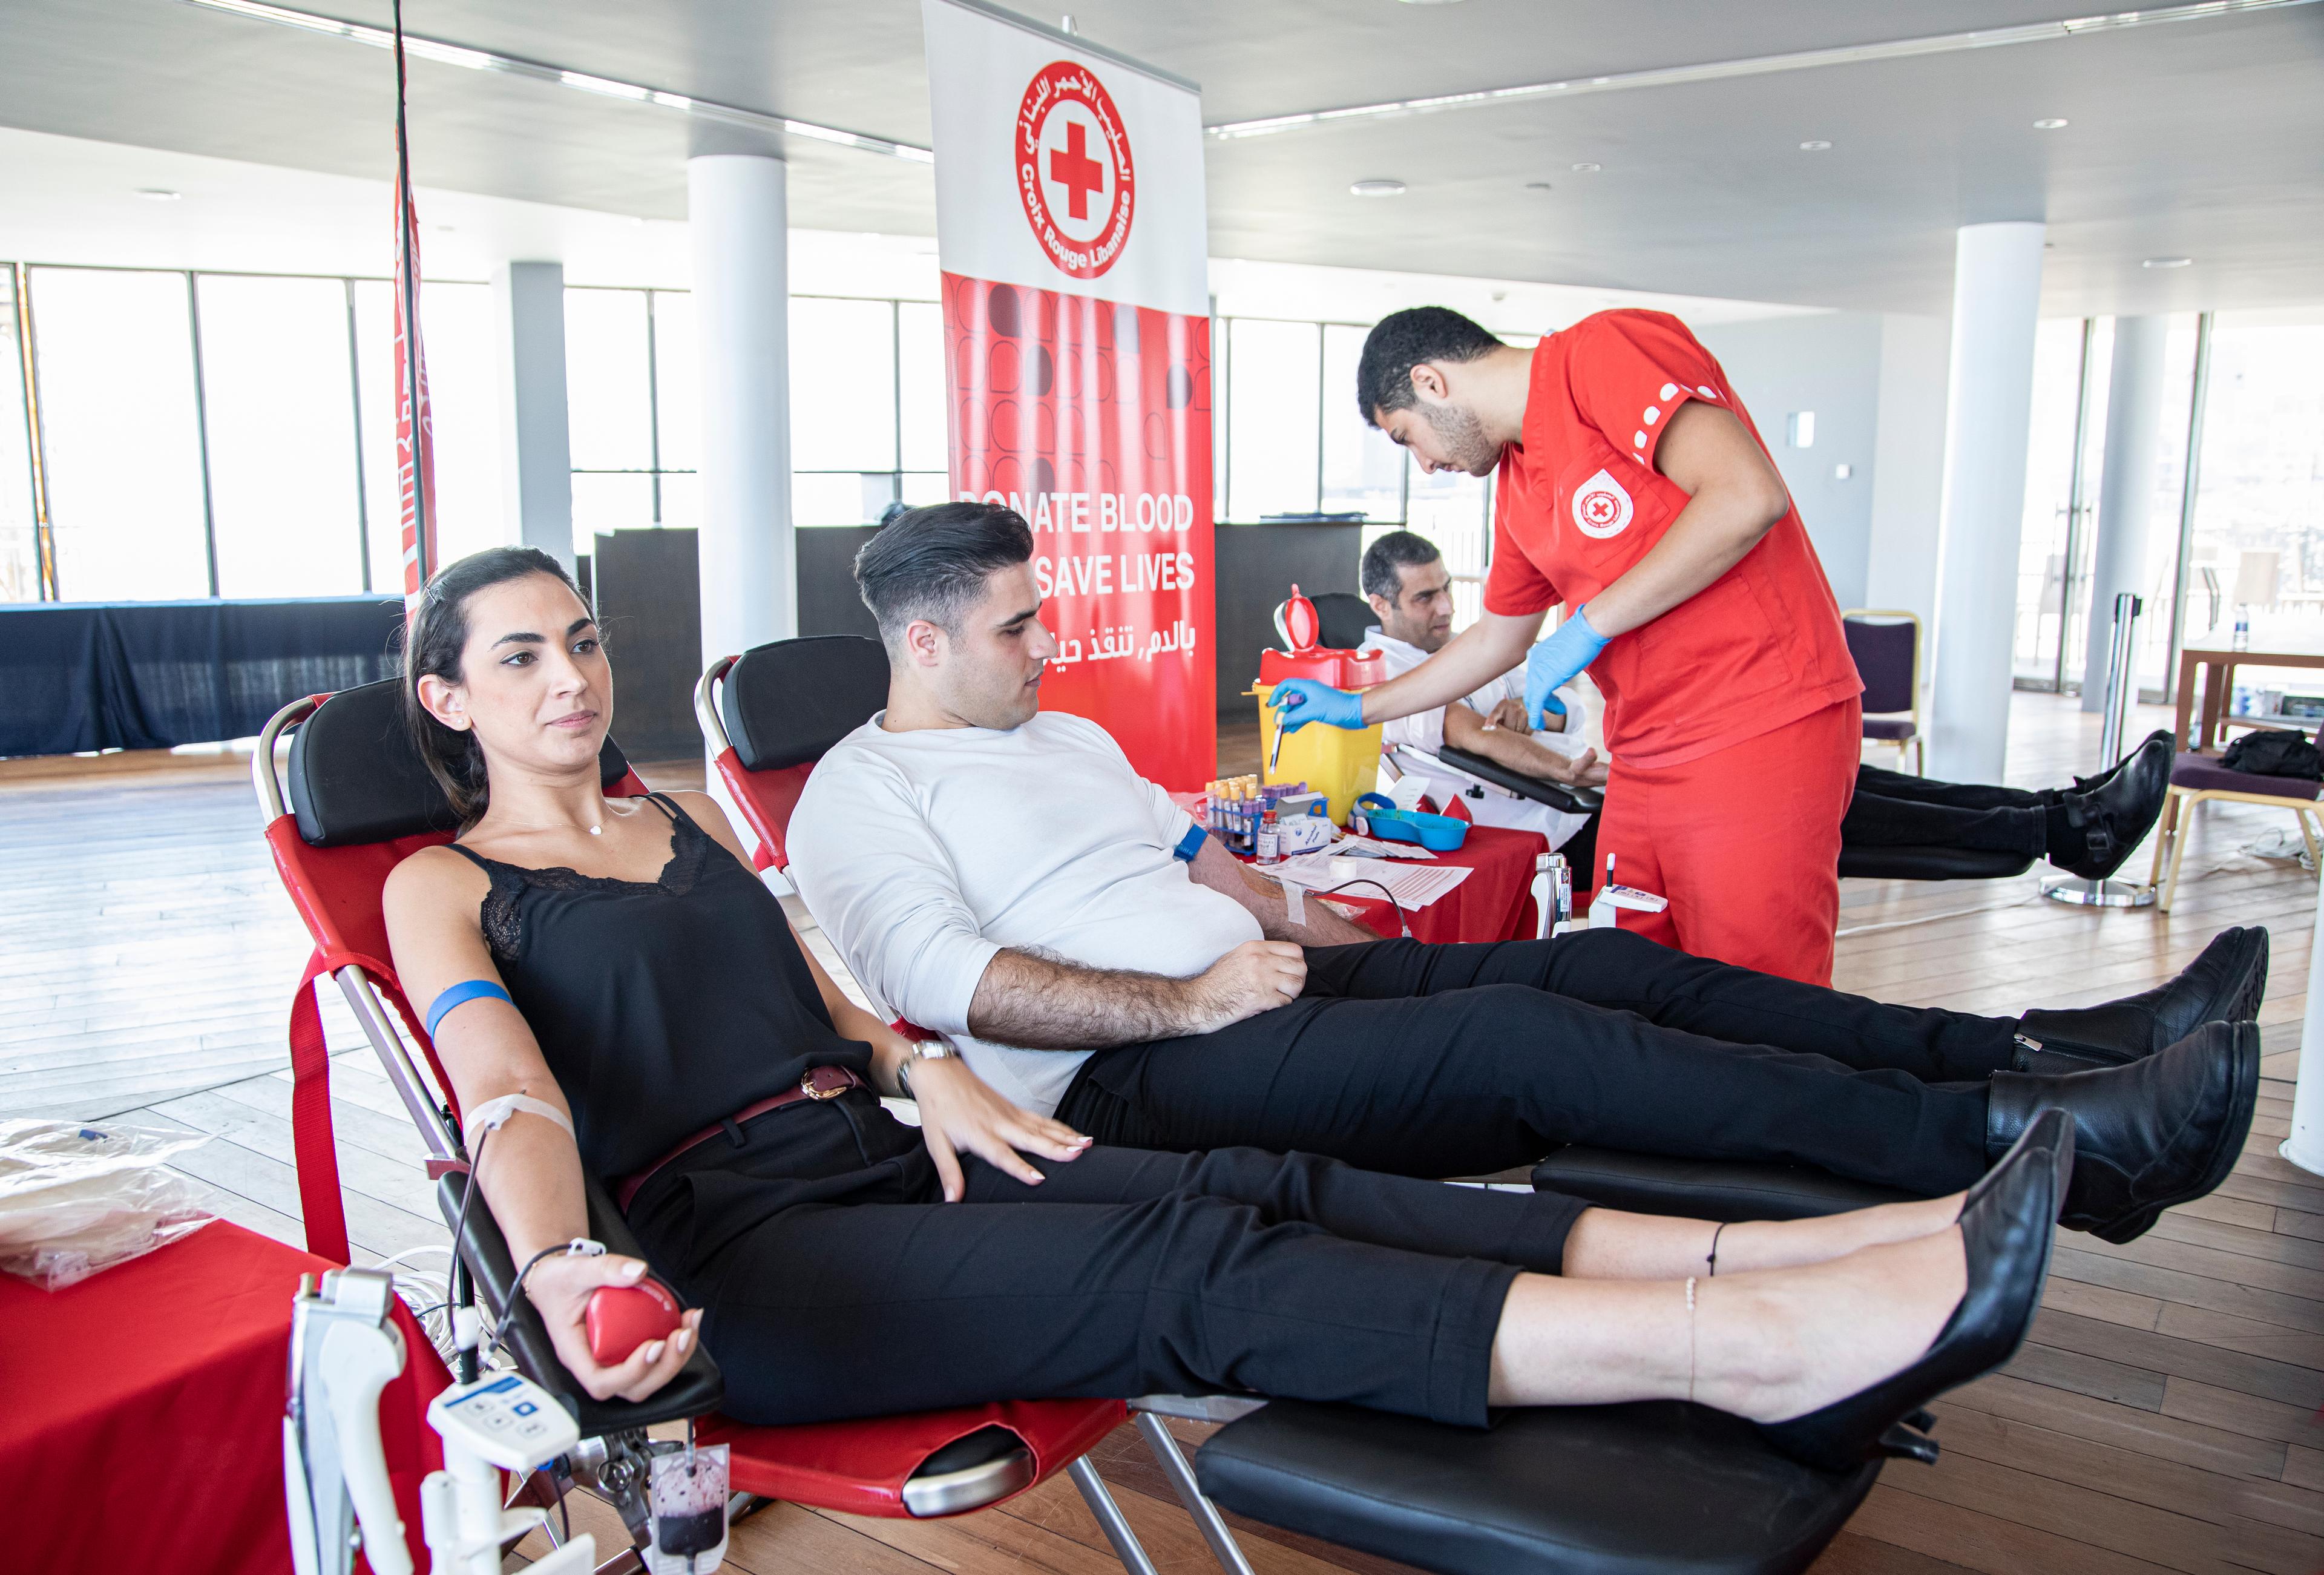 Three people donate blood at the Lebanese Red Cross. They are lying on reclining chairs.